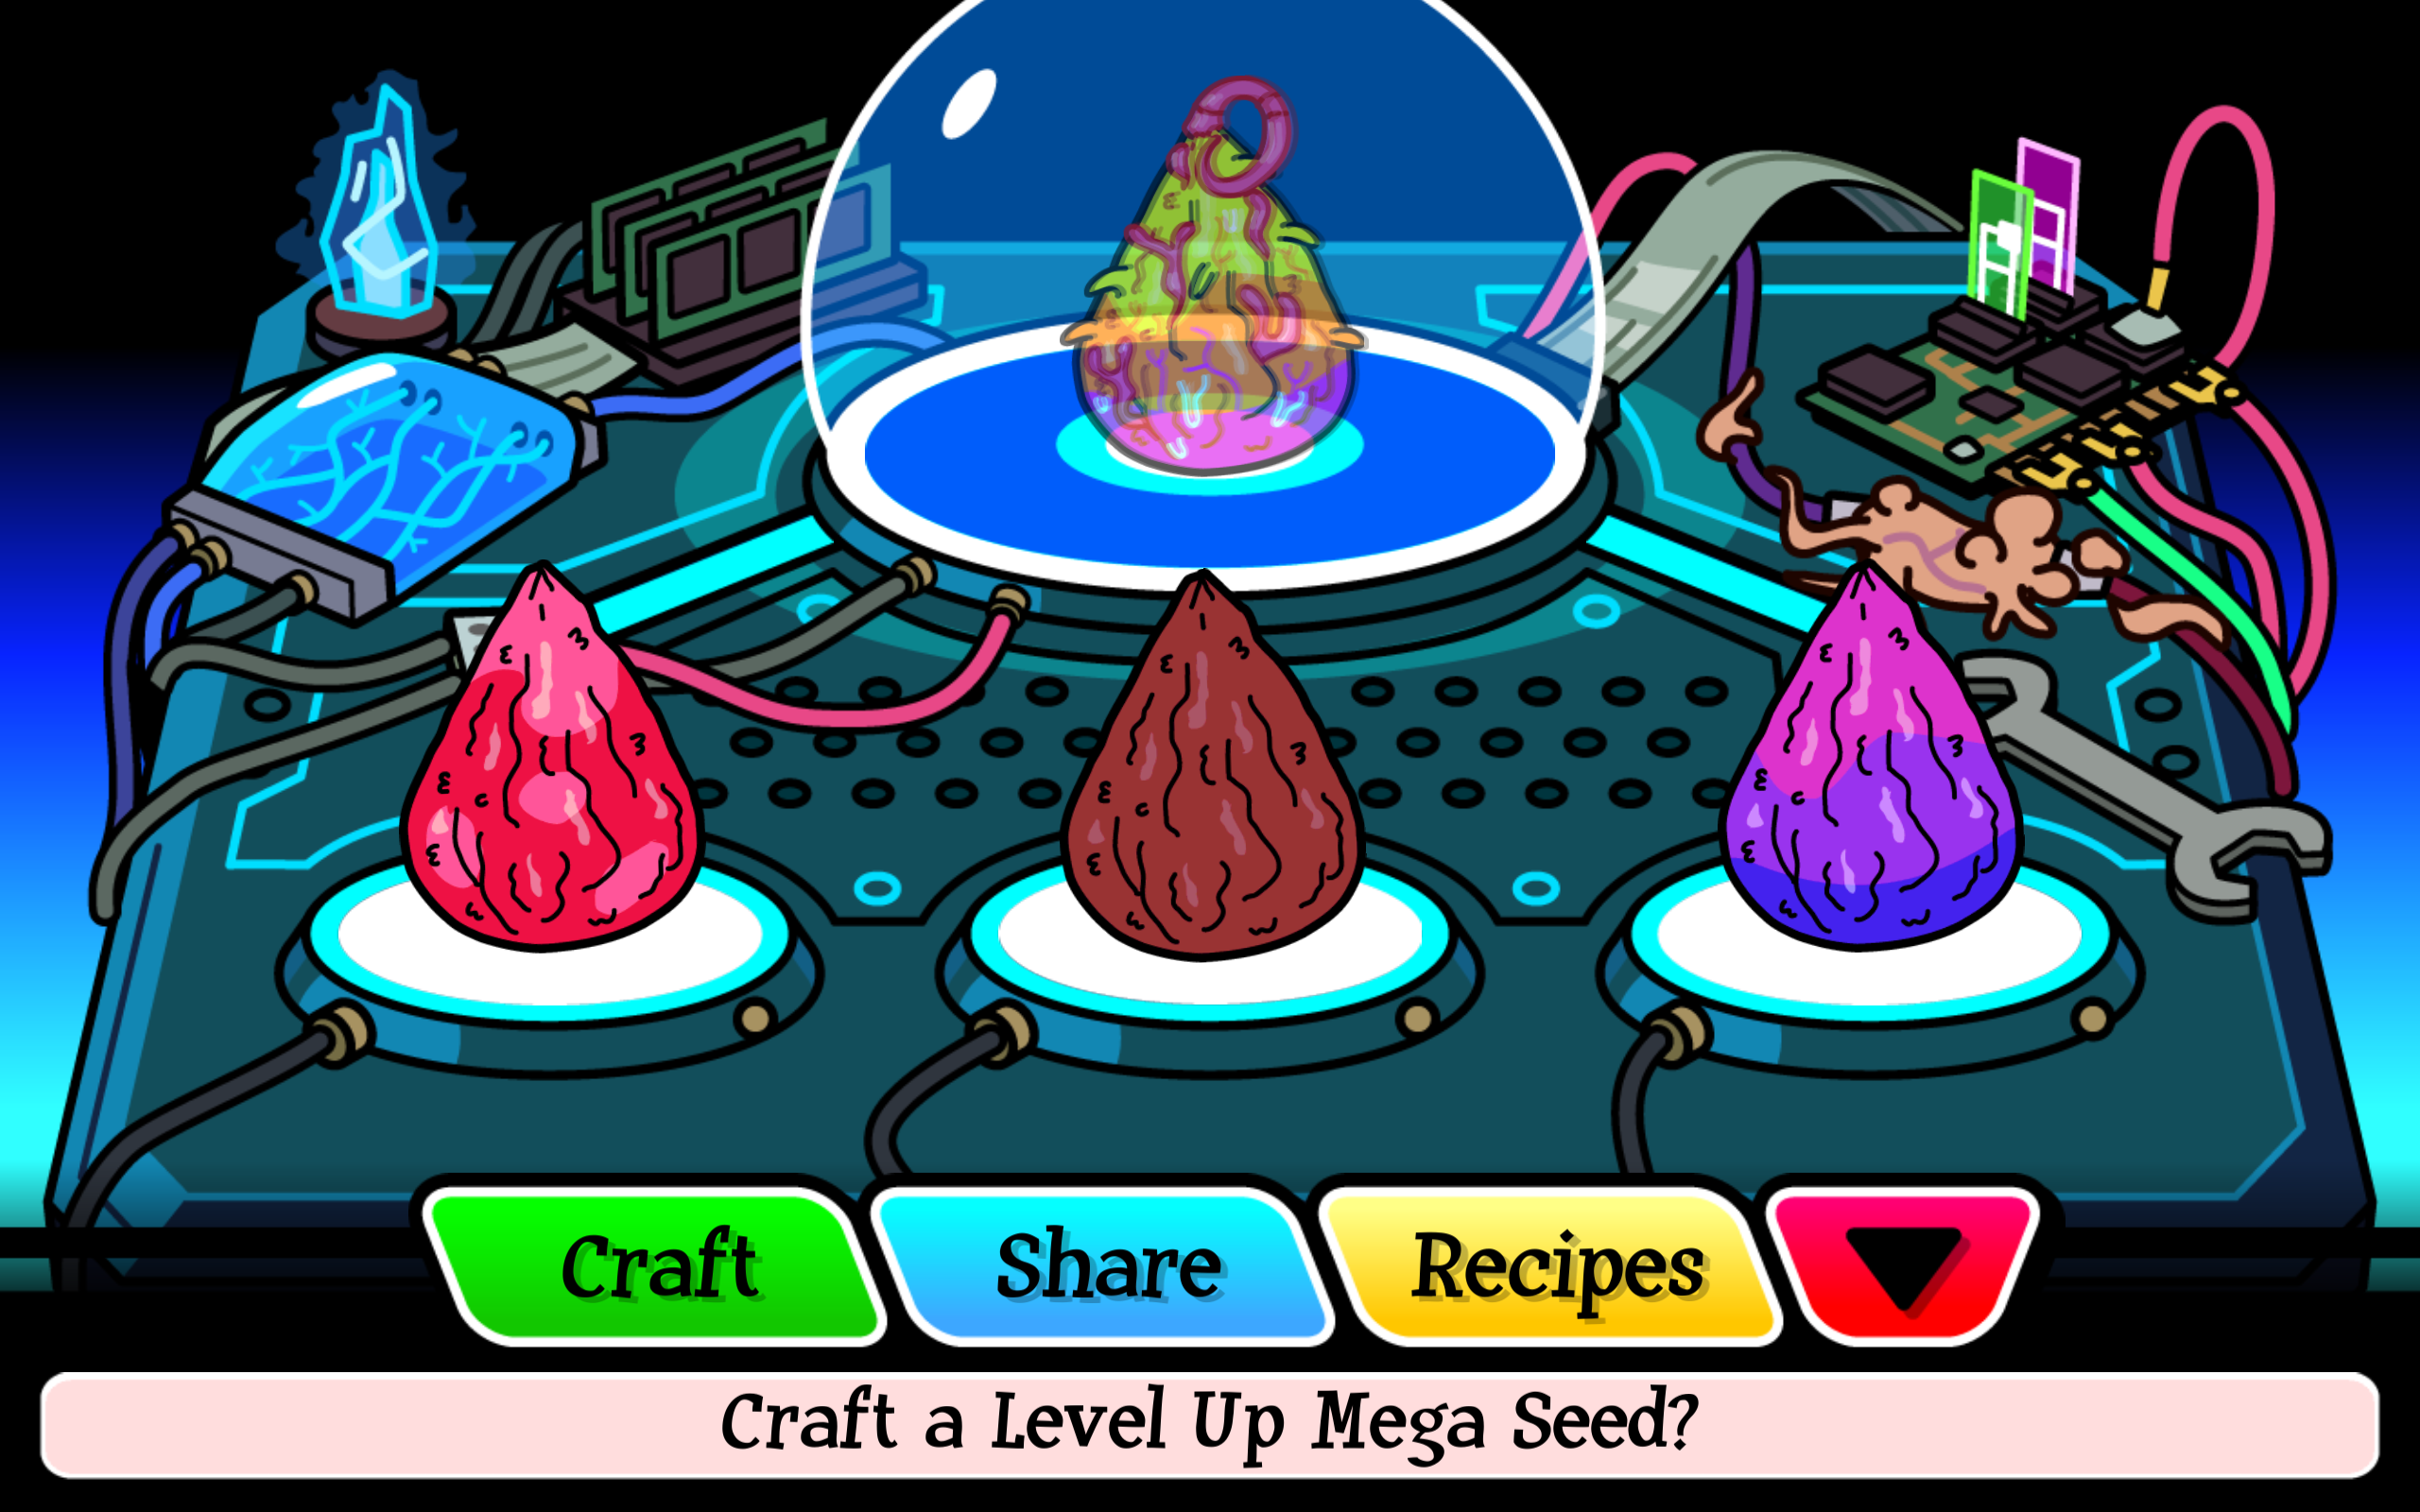 10. Level Up Seed